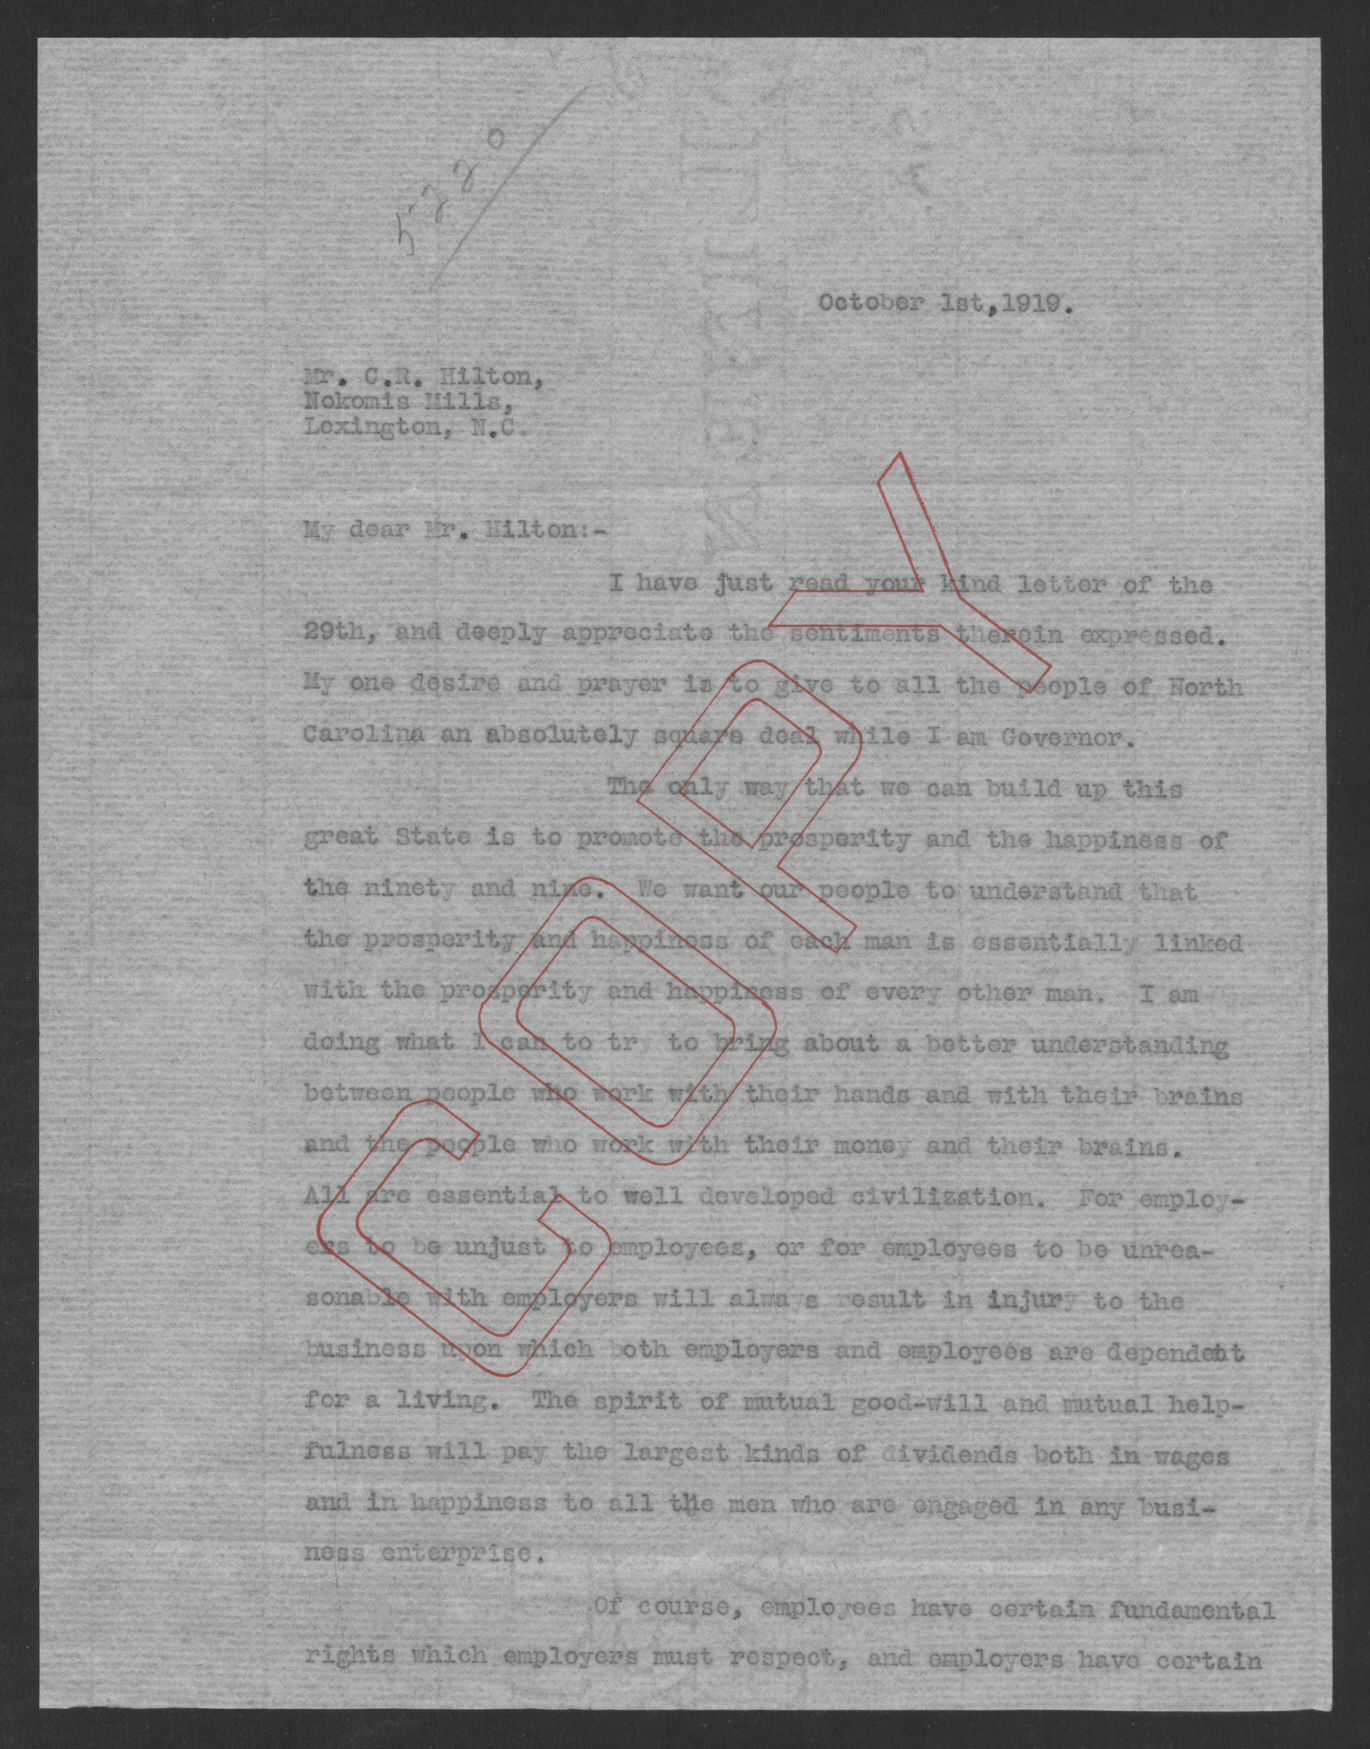 Letter from Thomas W. Bickett to Charles R. Hilton, October 1, 1919, page 1